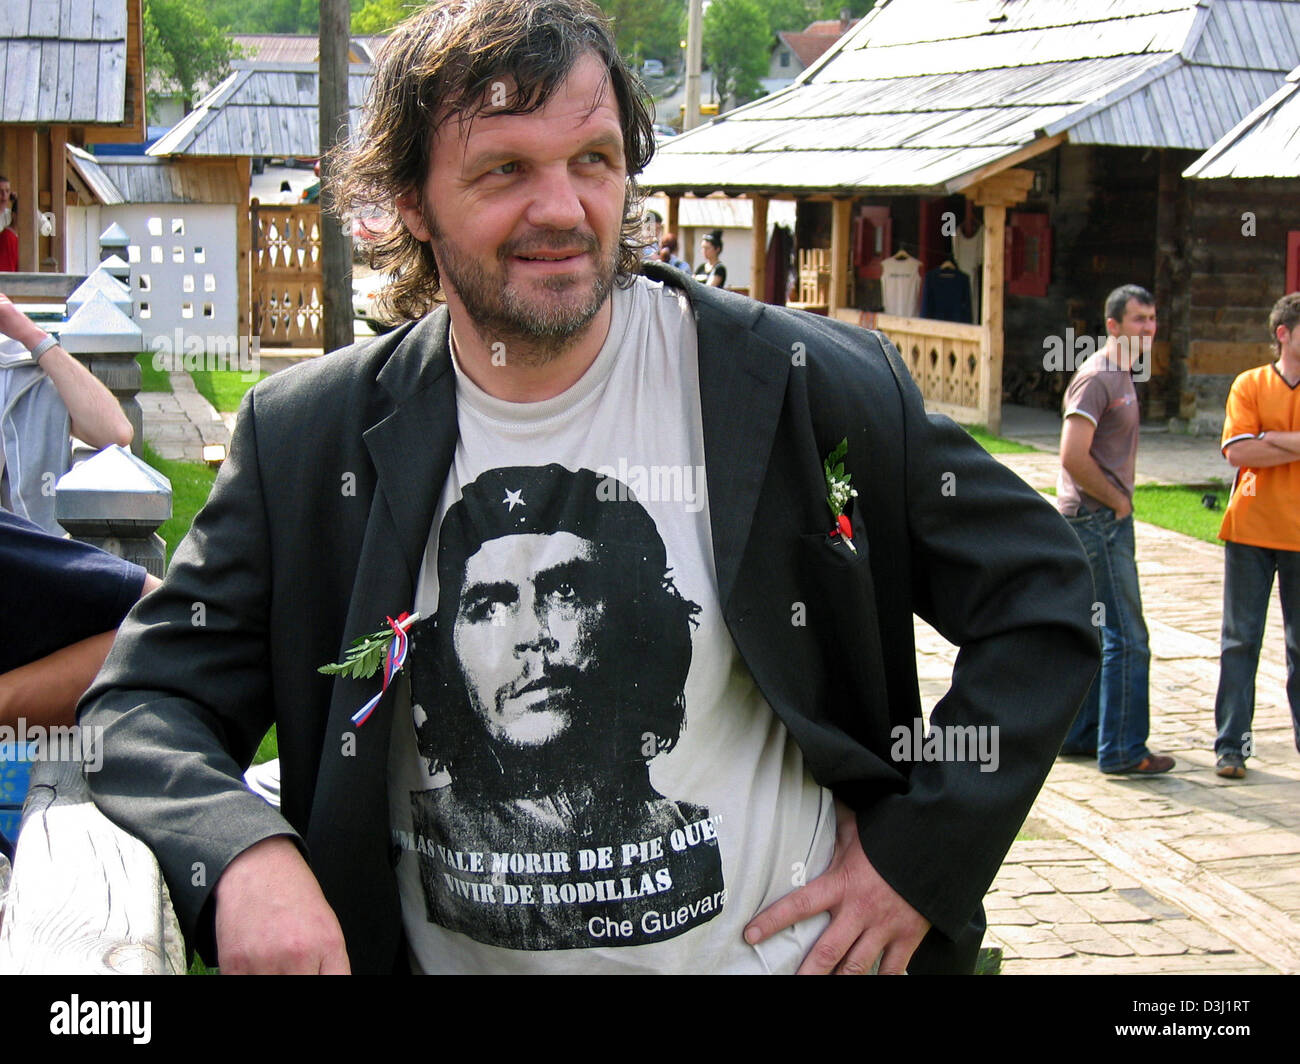 (dpa) - Bosnian film director Emir Kusturica smiles as he leans against a wooden ballustrade in his village called 'Kuestendorf', Serbia and Montenegro, 28 May 2005. Kusturica founded and built the village of 'Kuestendorf' as a centre for culture and science in the Serbian mountains. In its simplicity and humility the village is ment to represent an alternative counterdraft to a wo Stock Photo